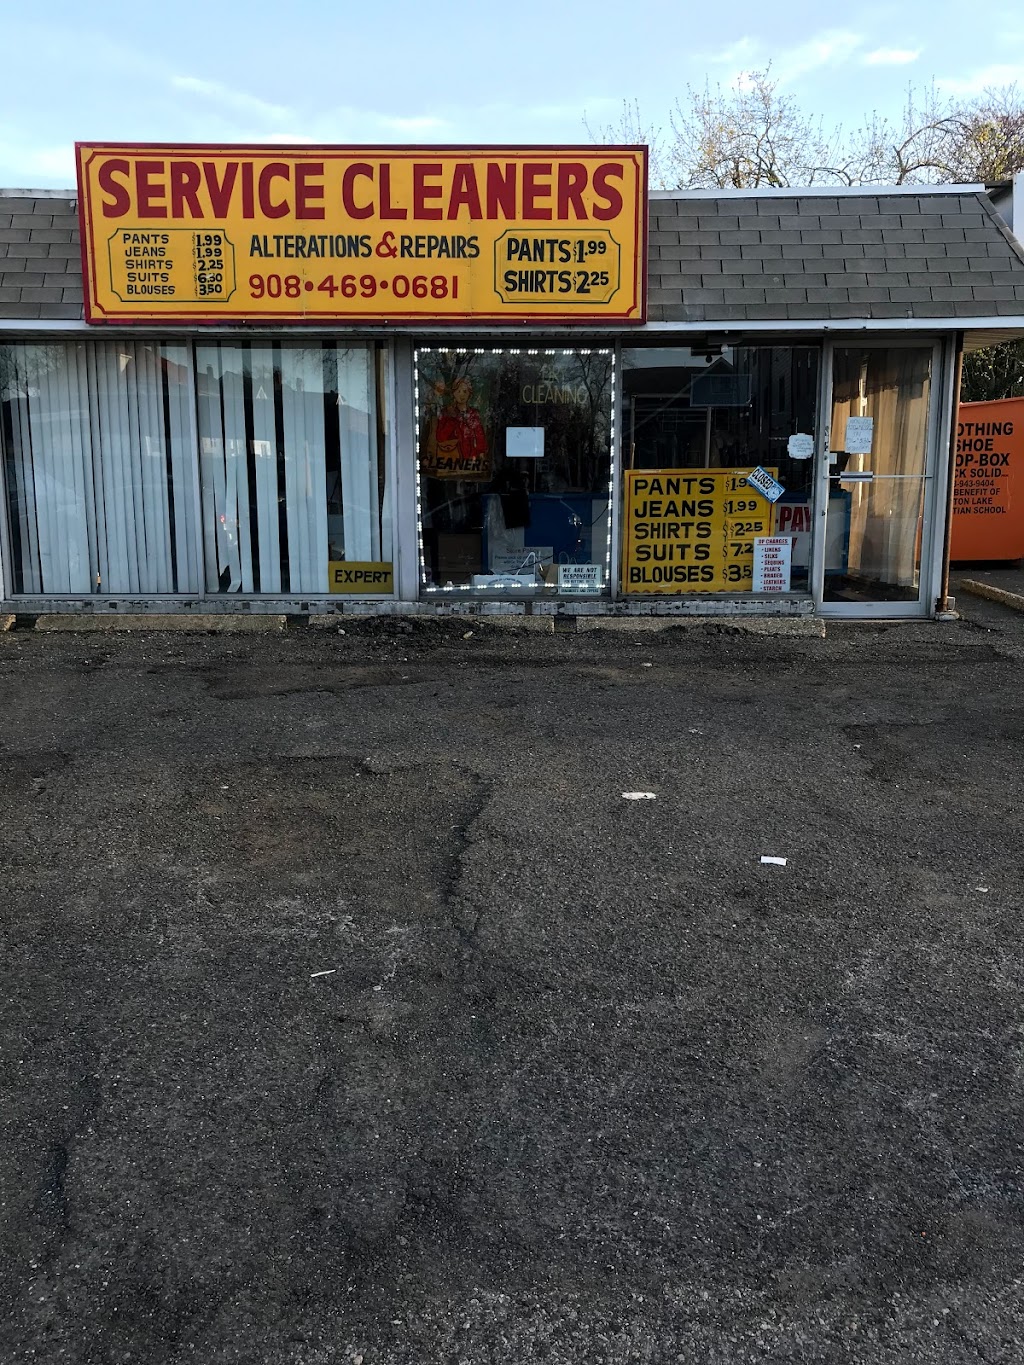 Service Cleaners | 1304 North Ave, Elizabeth, NJ 07208 | Phone: (908) 355-0790